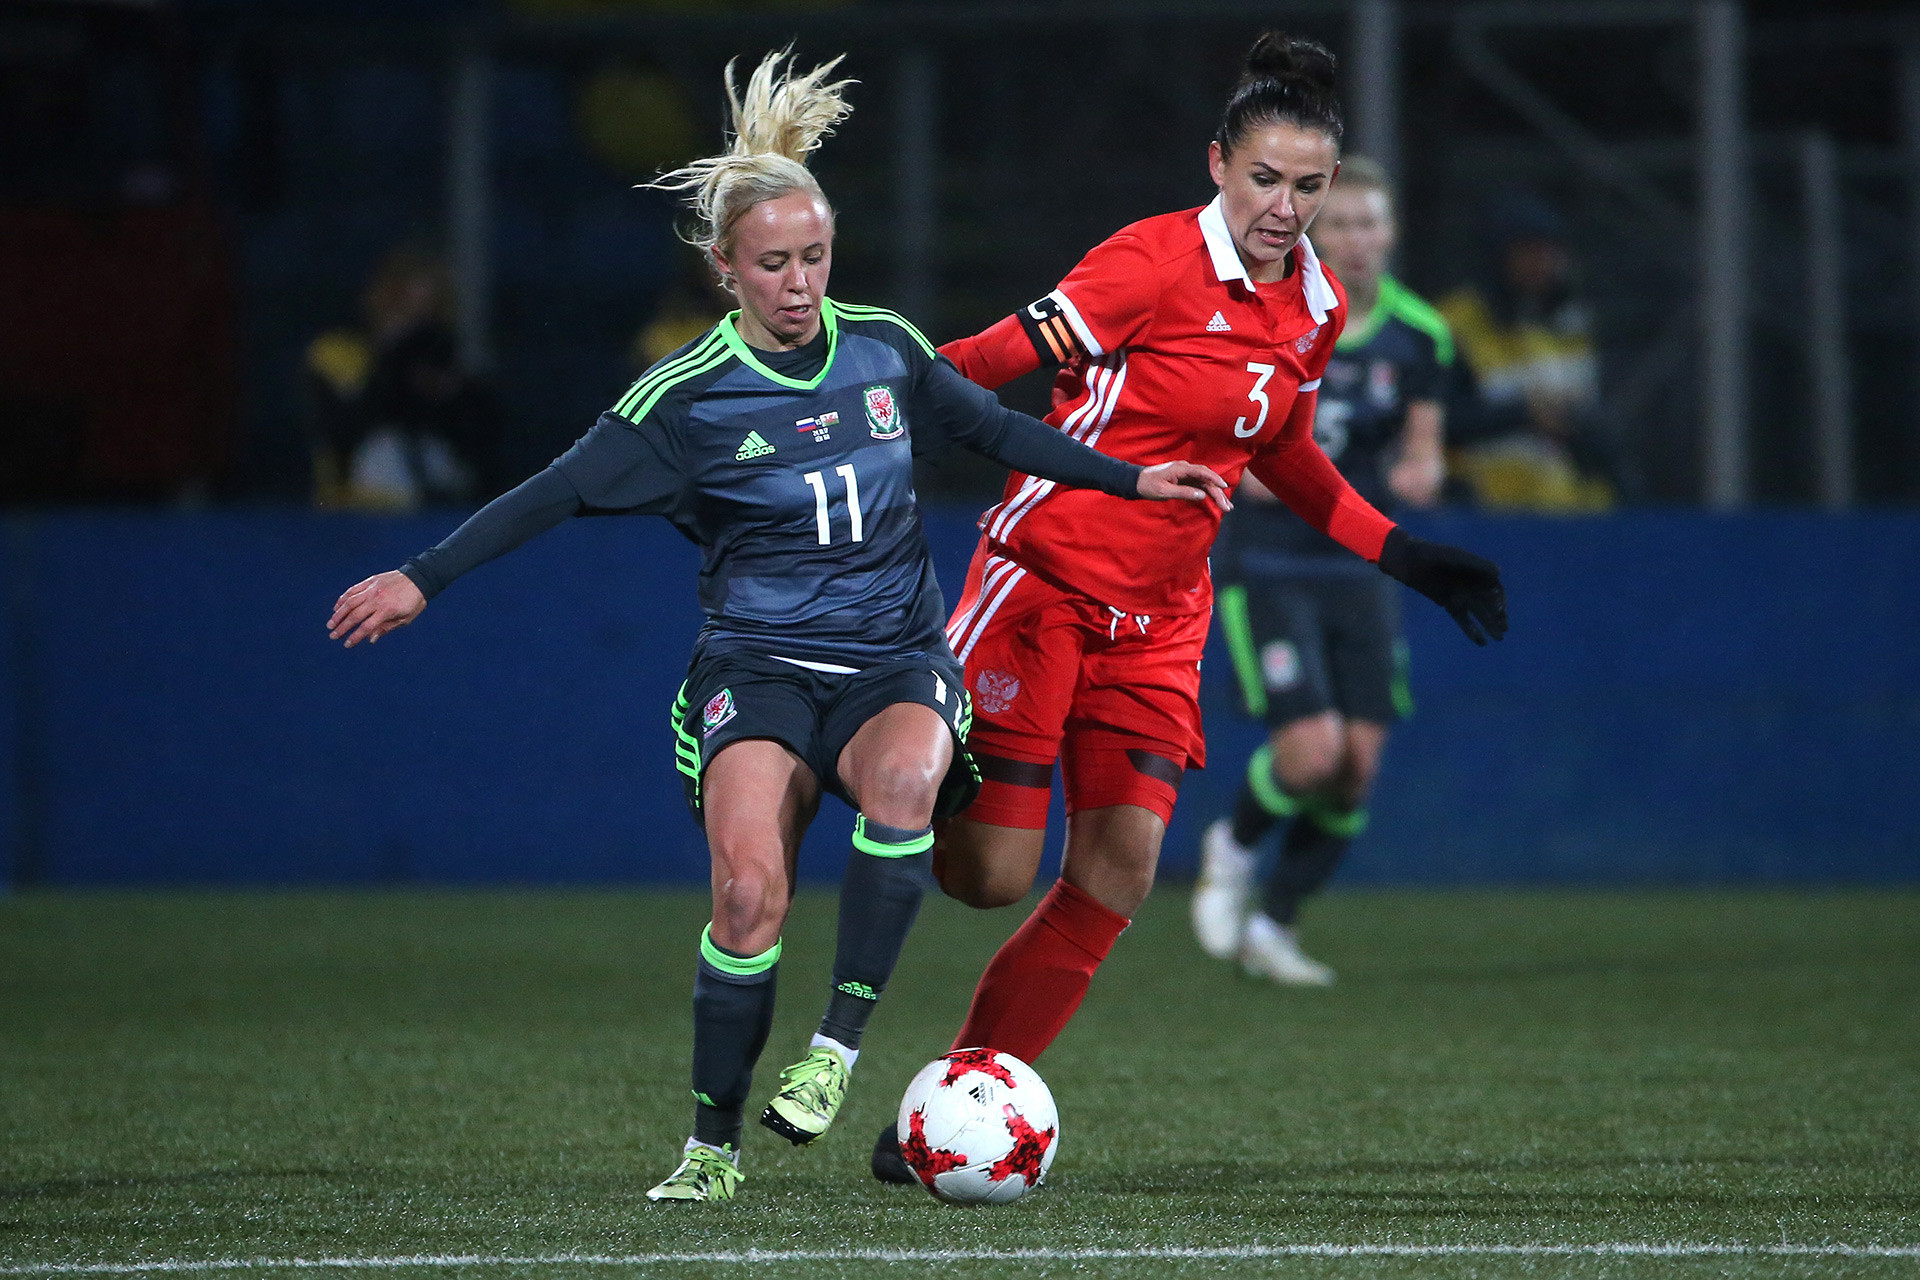 Wales' Nadia Lawrence (L) and Russia's Anna Kozhnikova in the 2019 FIFA Women's World Cup Qualification football match between Russia and Wales.